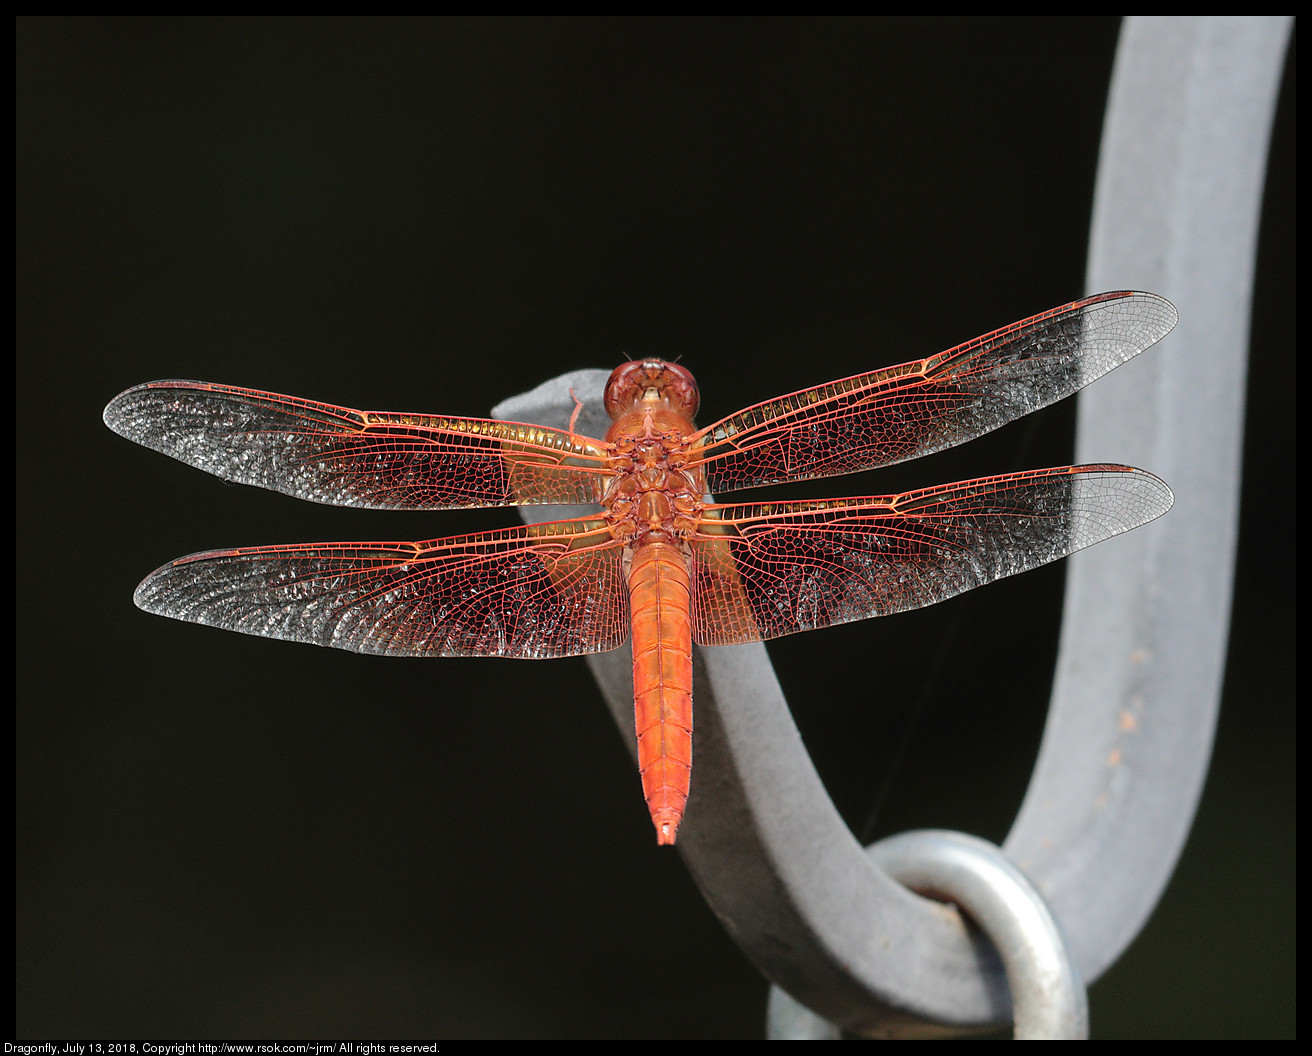 Dragonfly, July 13, 2018